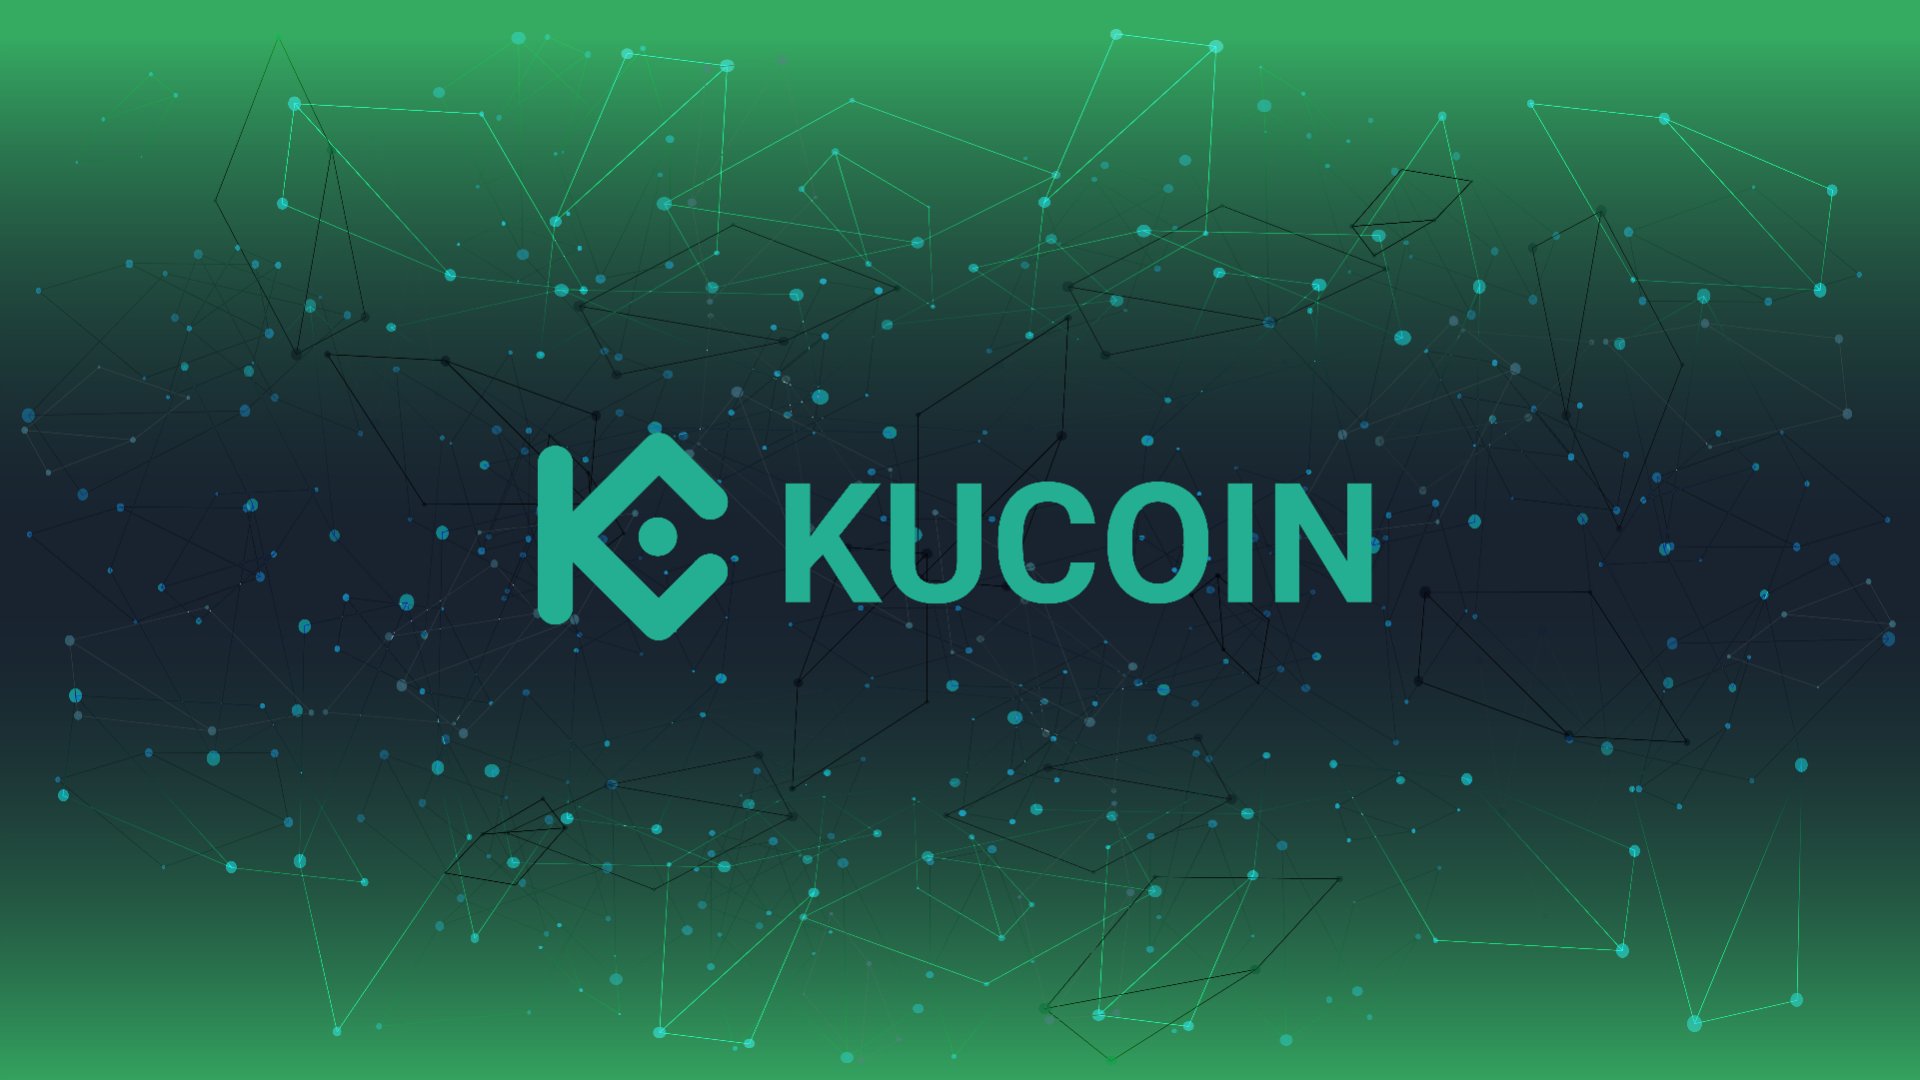 kucoin logo on abstract background